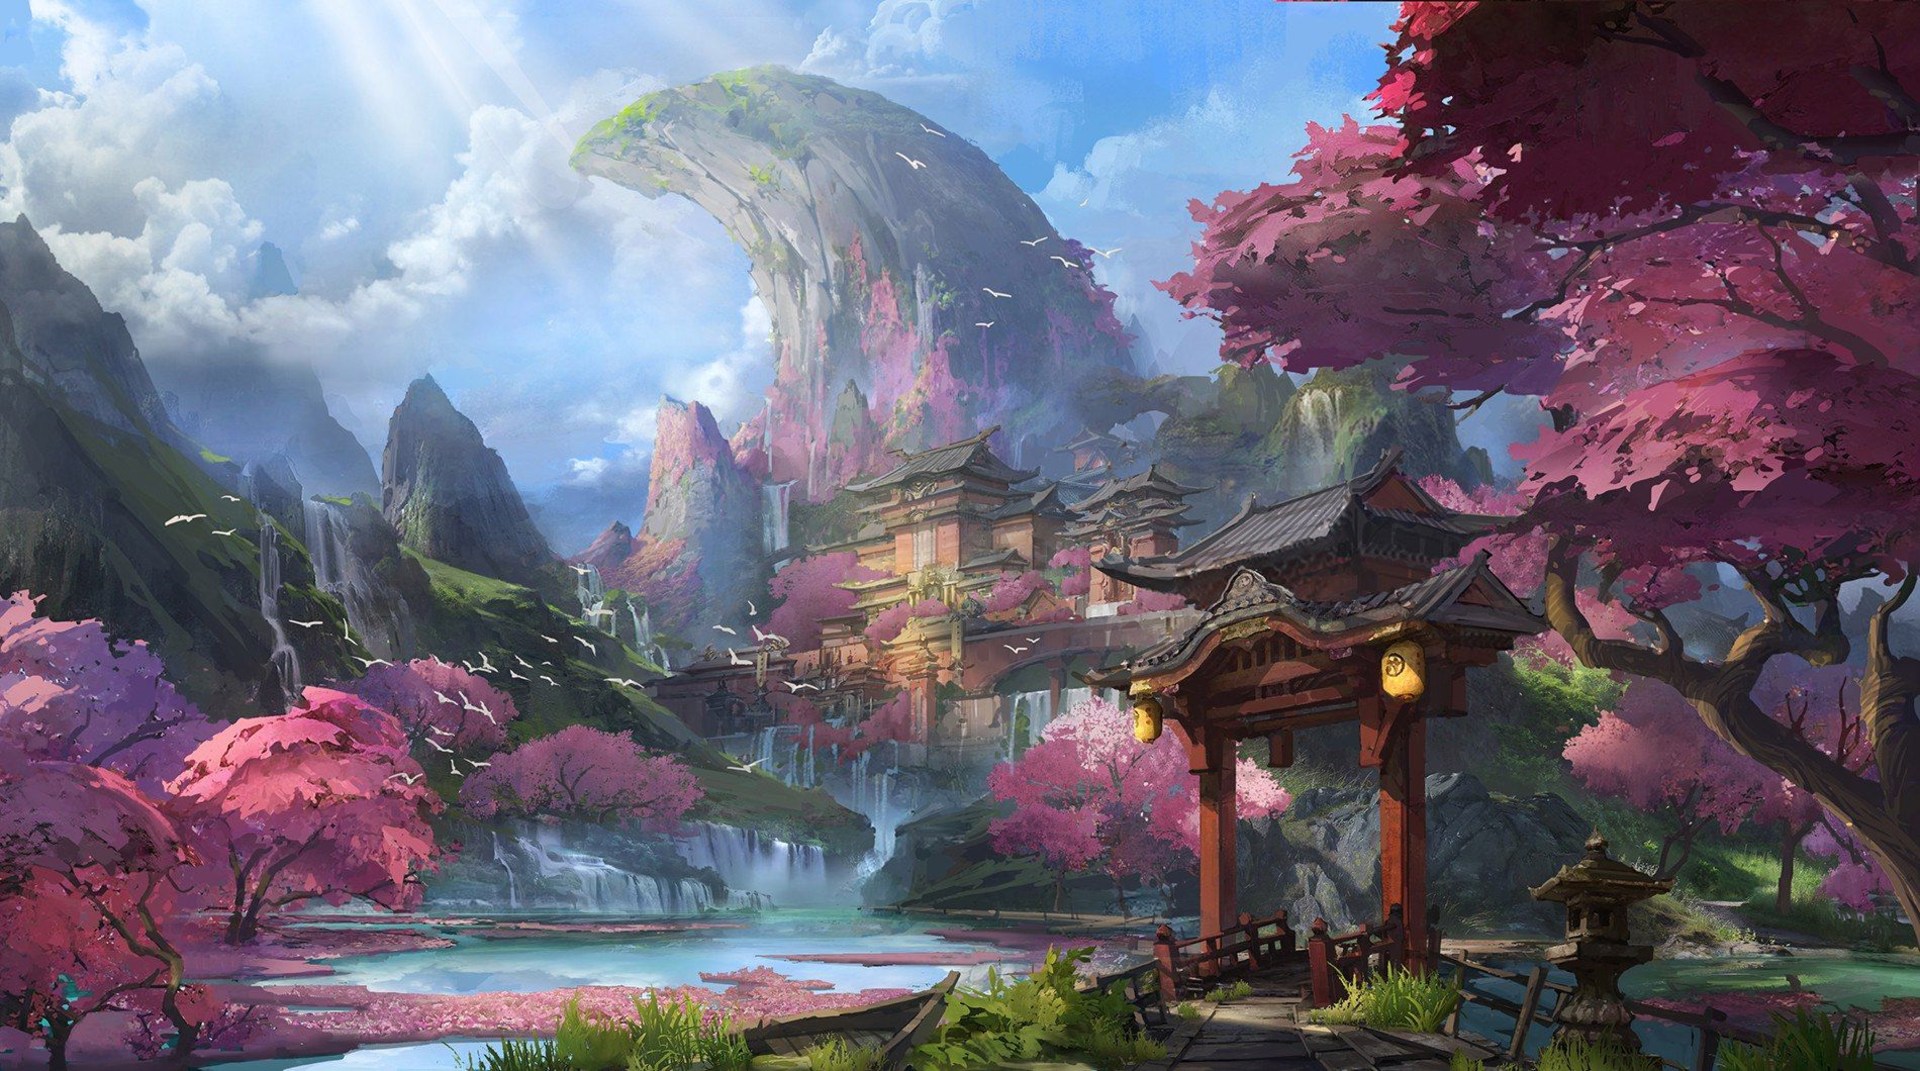 artwork, fantasy art, Chinese architecture, mountains, cherry blossom, river | 1920x1071